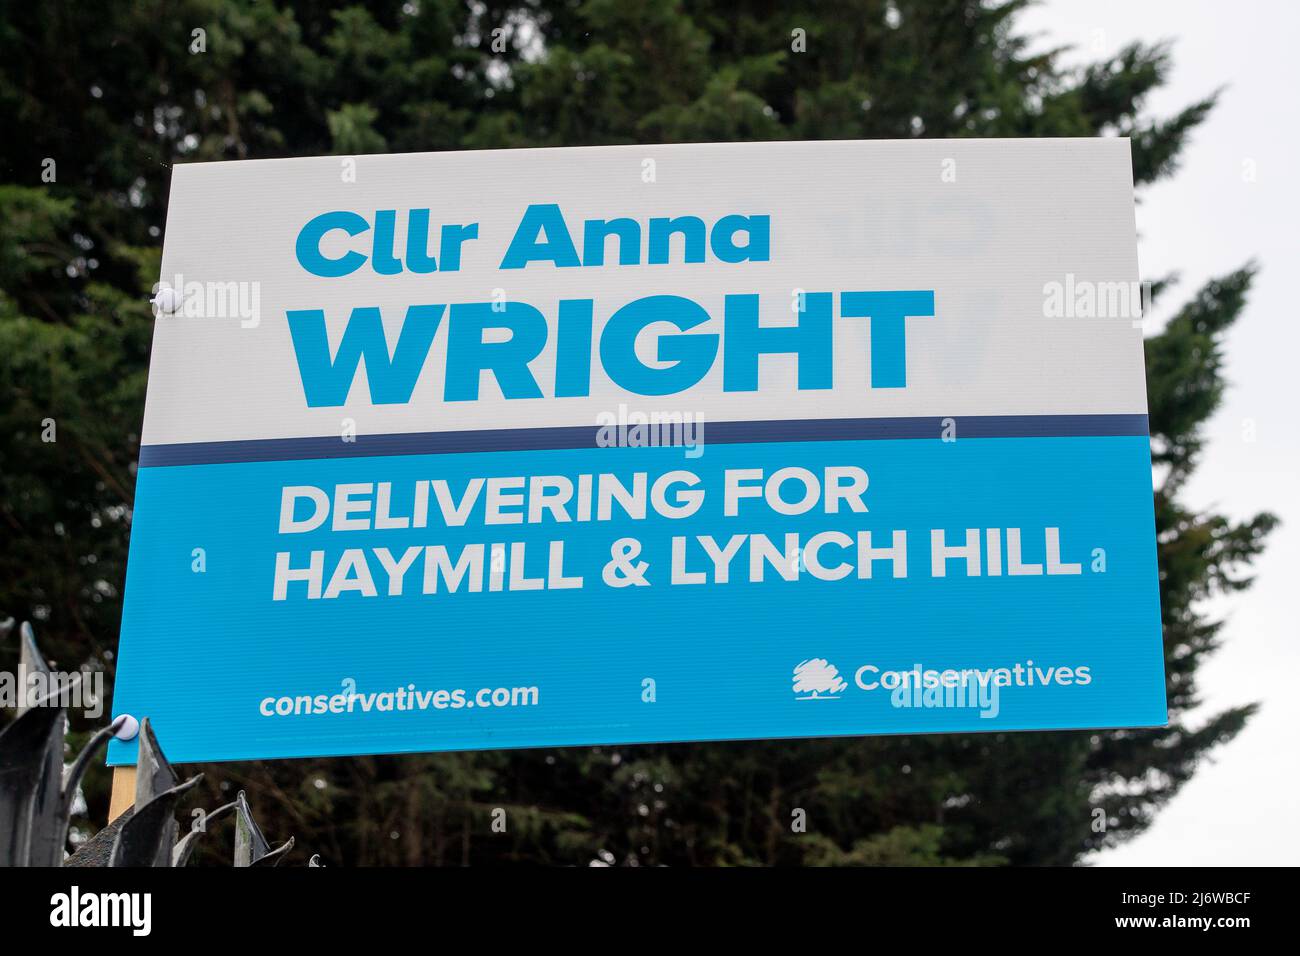 Slough, Berkshire, UK. 4th May, 2022. Boards promoting Tory Cllr Anna Wright in Slough. Following the handling of the Covid-19 crisis, the PPE scandal, Partygate and the cost of living crisis, the Tory party are predicted to lose hundreds of seats in the local elections tomorrow. Credit: Maureen McLean/Alamy Live News Stock Photo